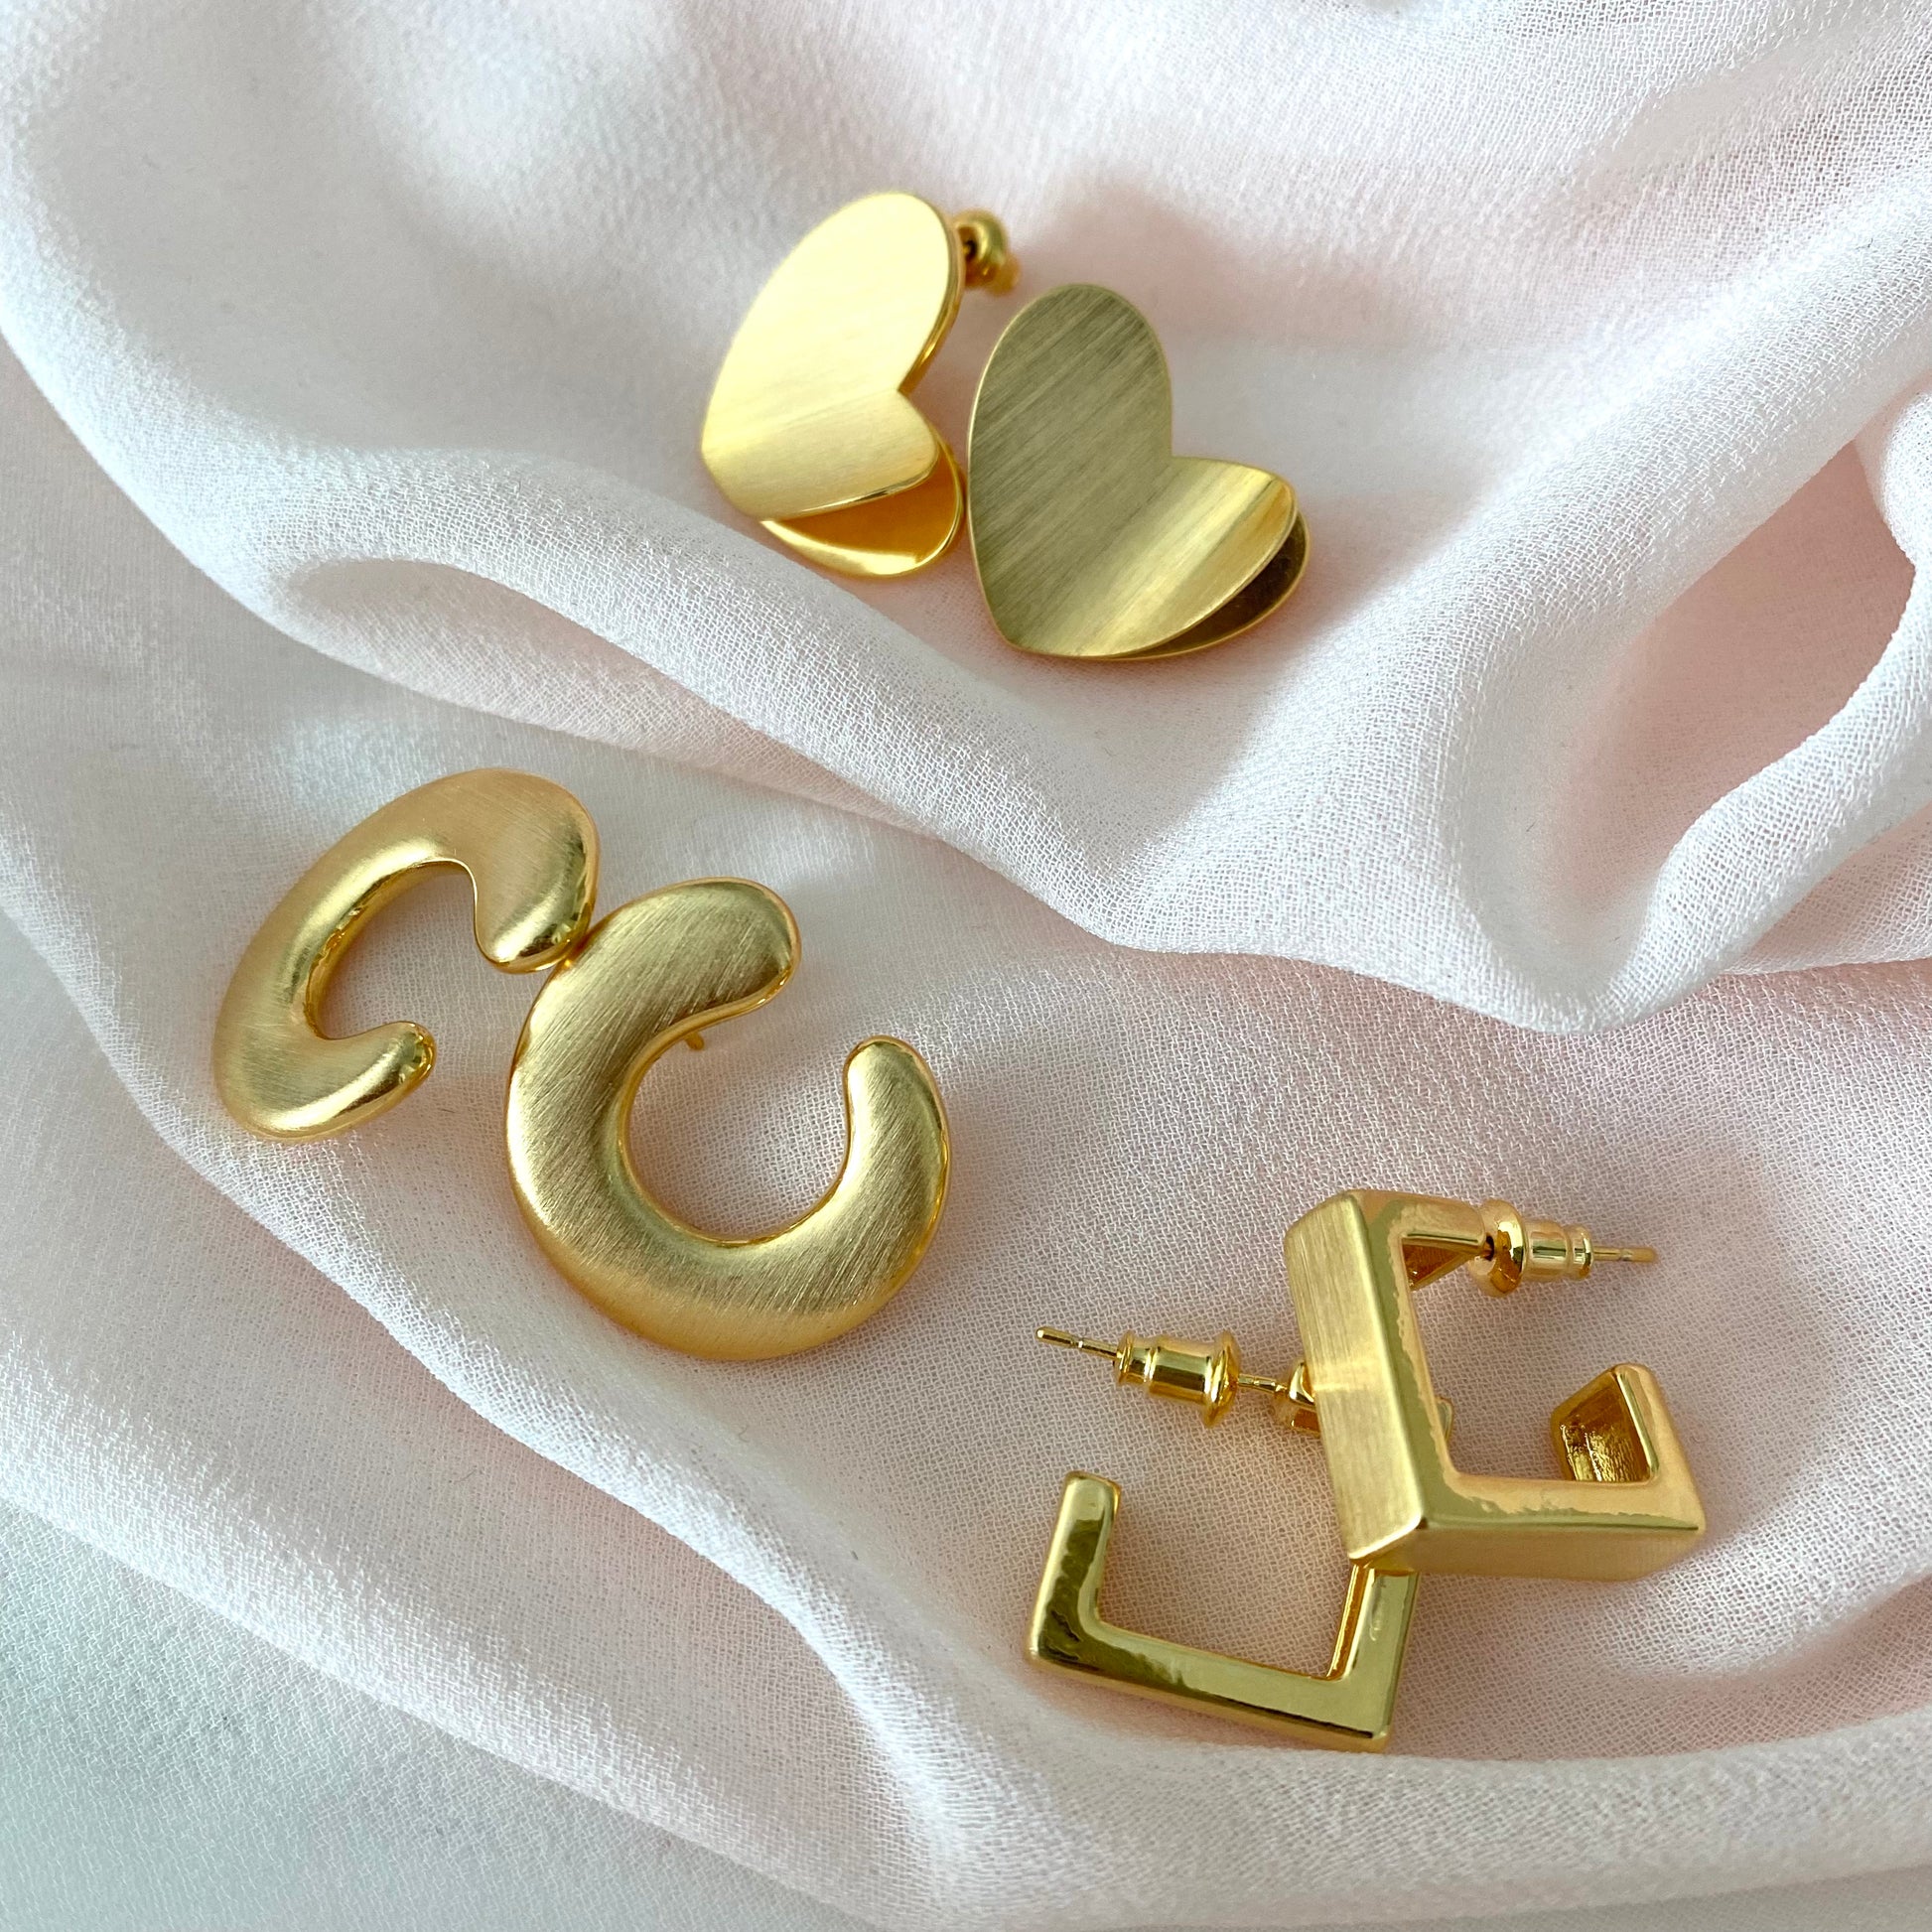 CC Earrings 18k Gold Plated Costume Jewelry Matte Finish